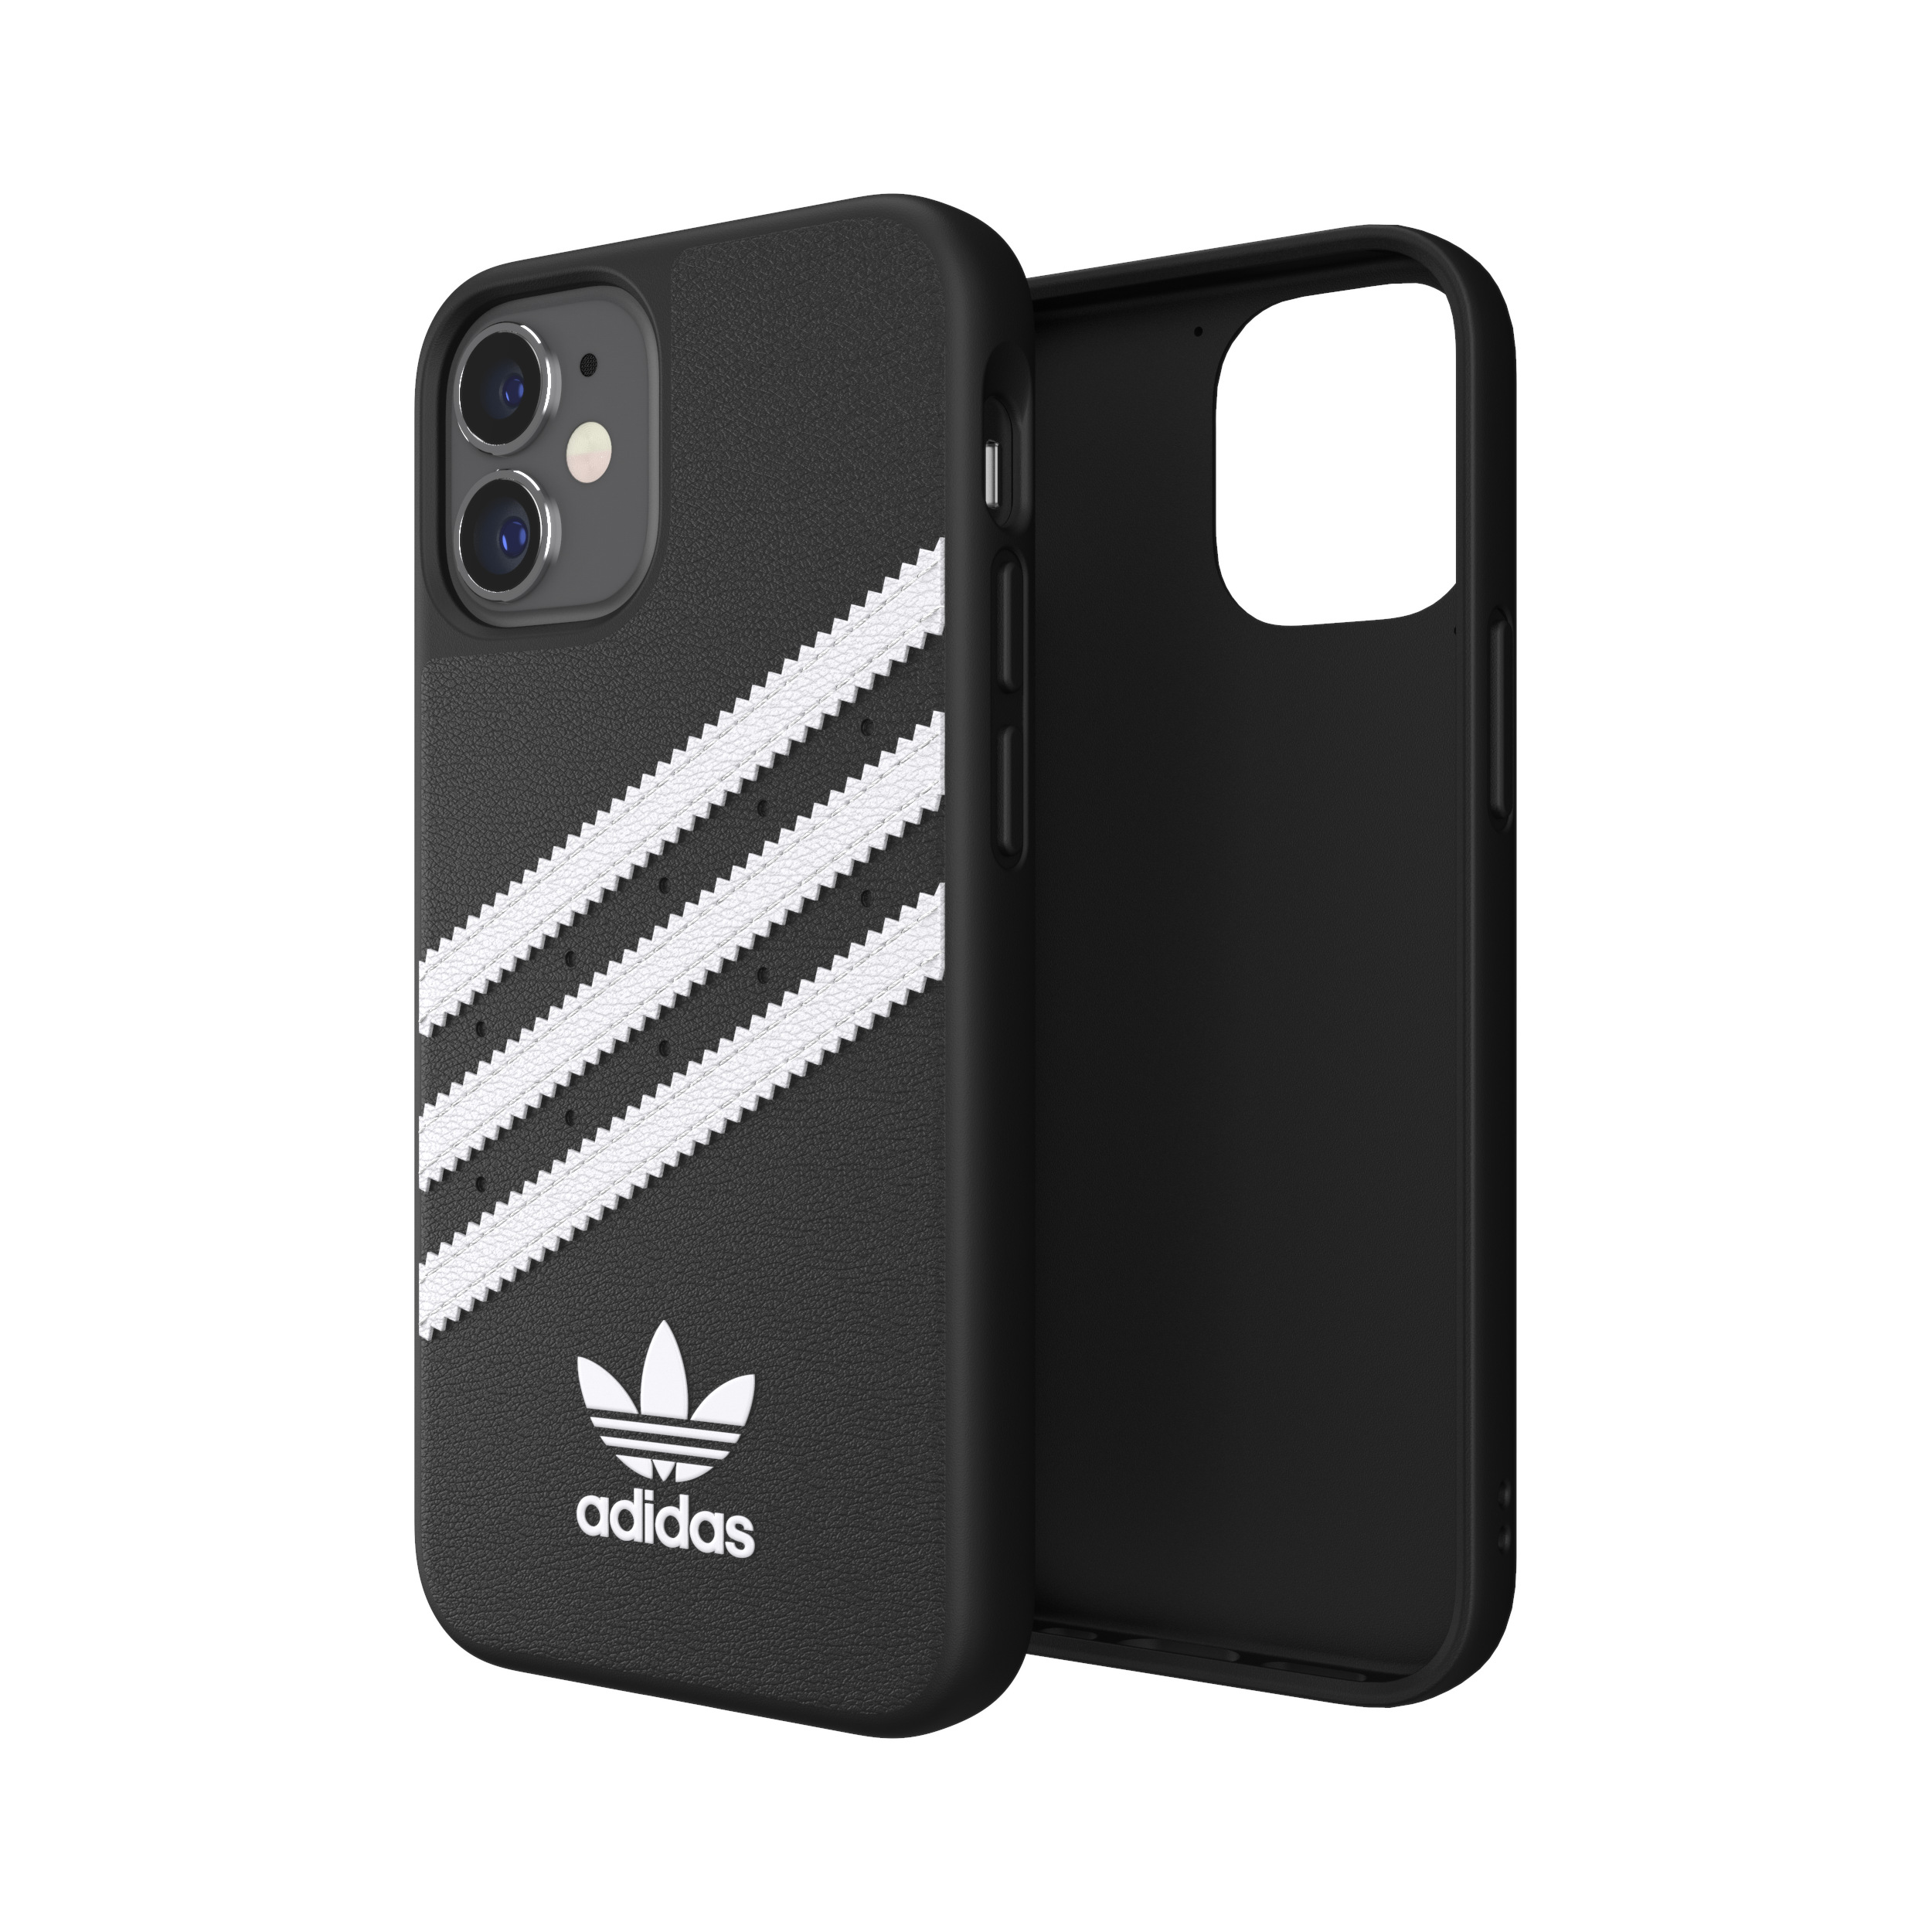 Adidas SAMBA Apple iPhone 12 Mini Moulded Case - Back cover w/ 3 Stripes & Trefoil Design, Scratch & Drop Protection w/ TPU Bumper, Wireless Charging Compatible - Black/White